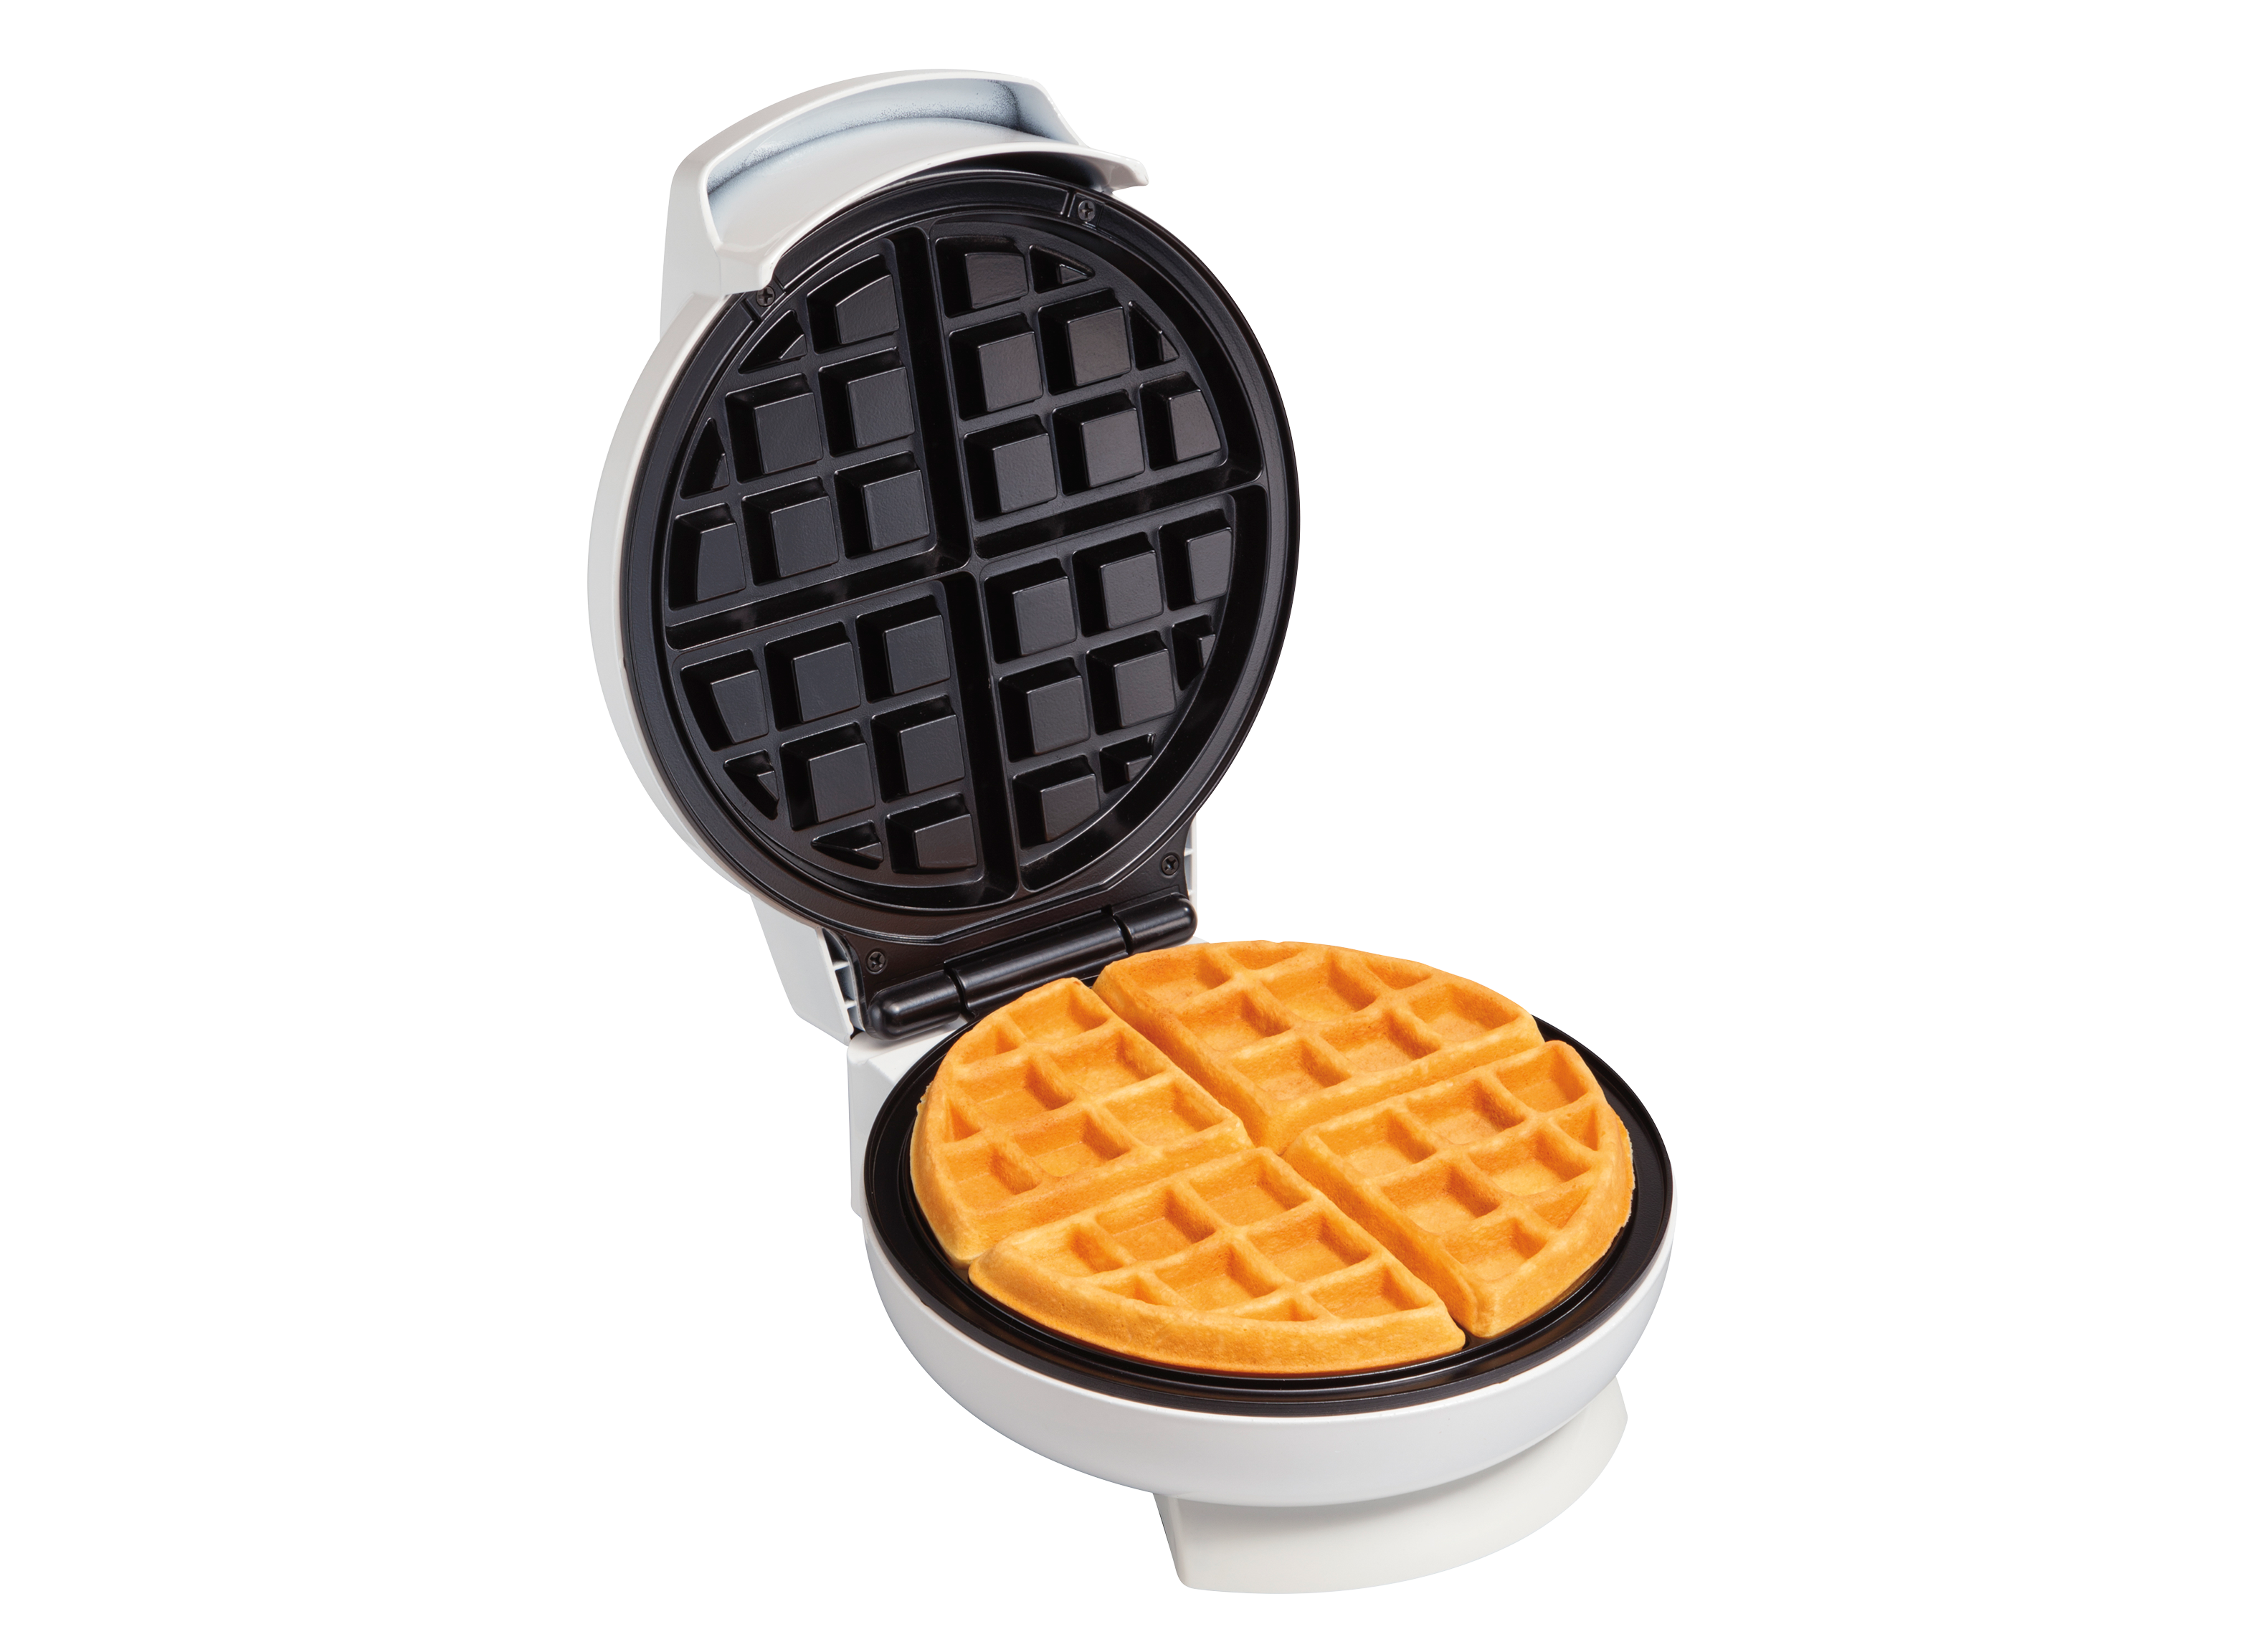 https://crdms.images.consumerreports.org/prod/products/cr/models/398801-waffle-makers-proctor-silex-26070-10005896.png